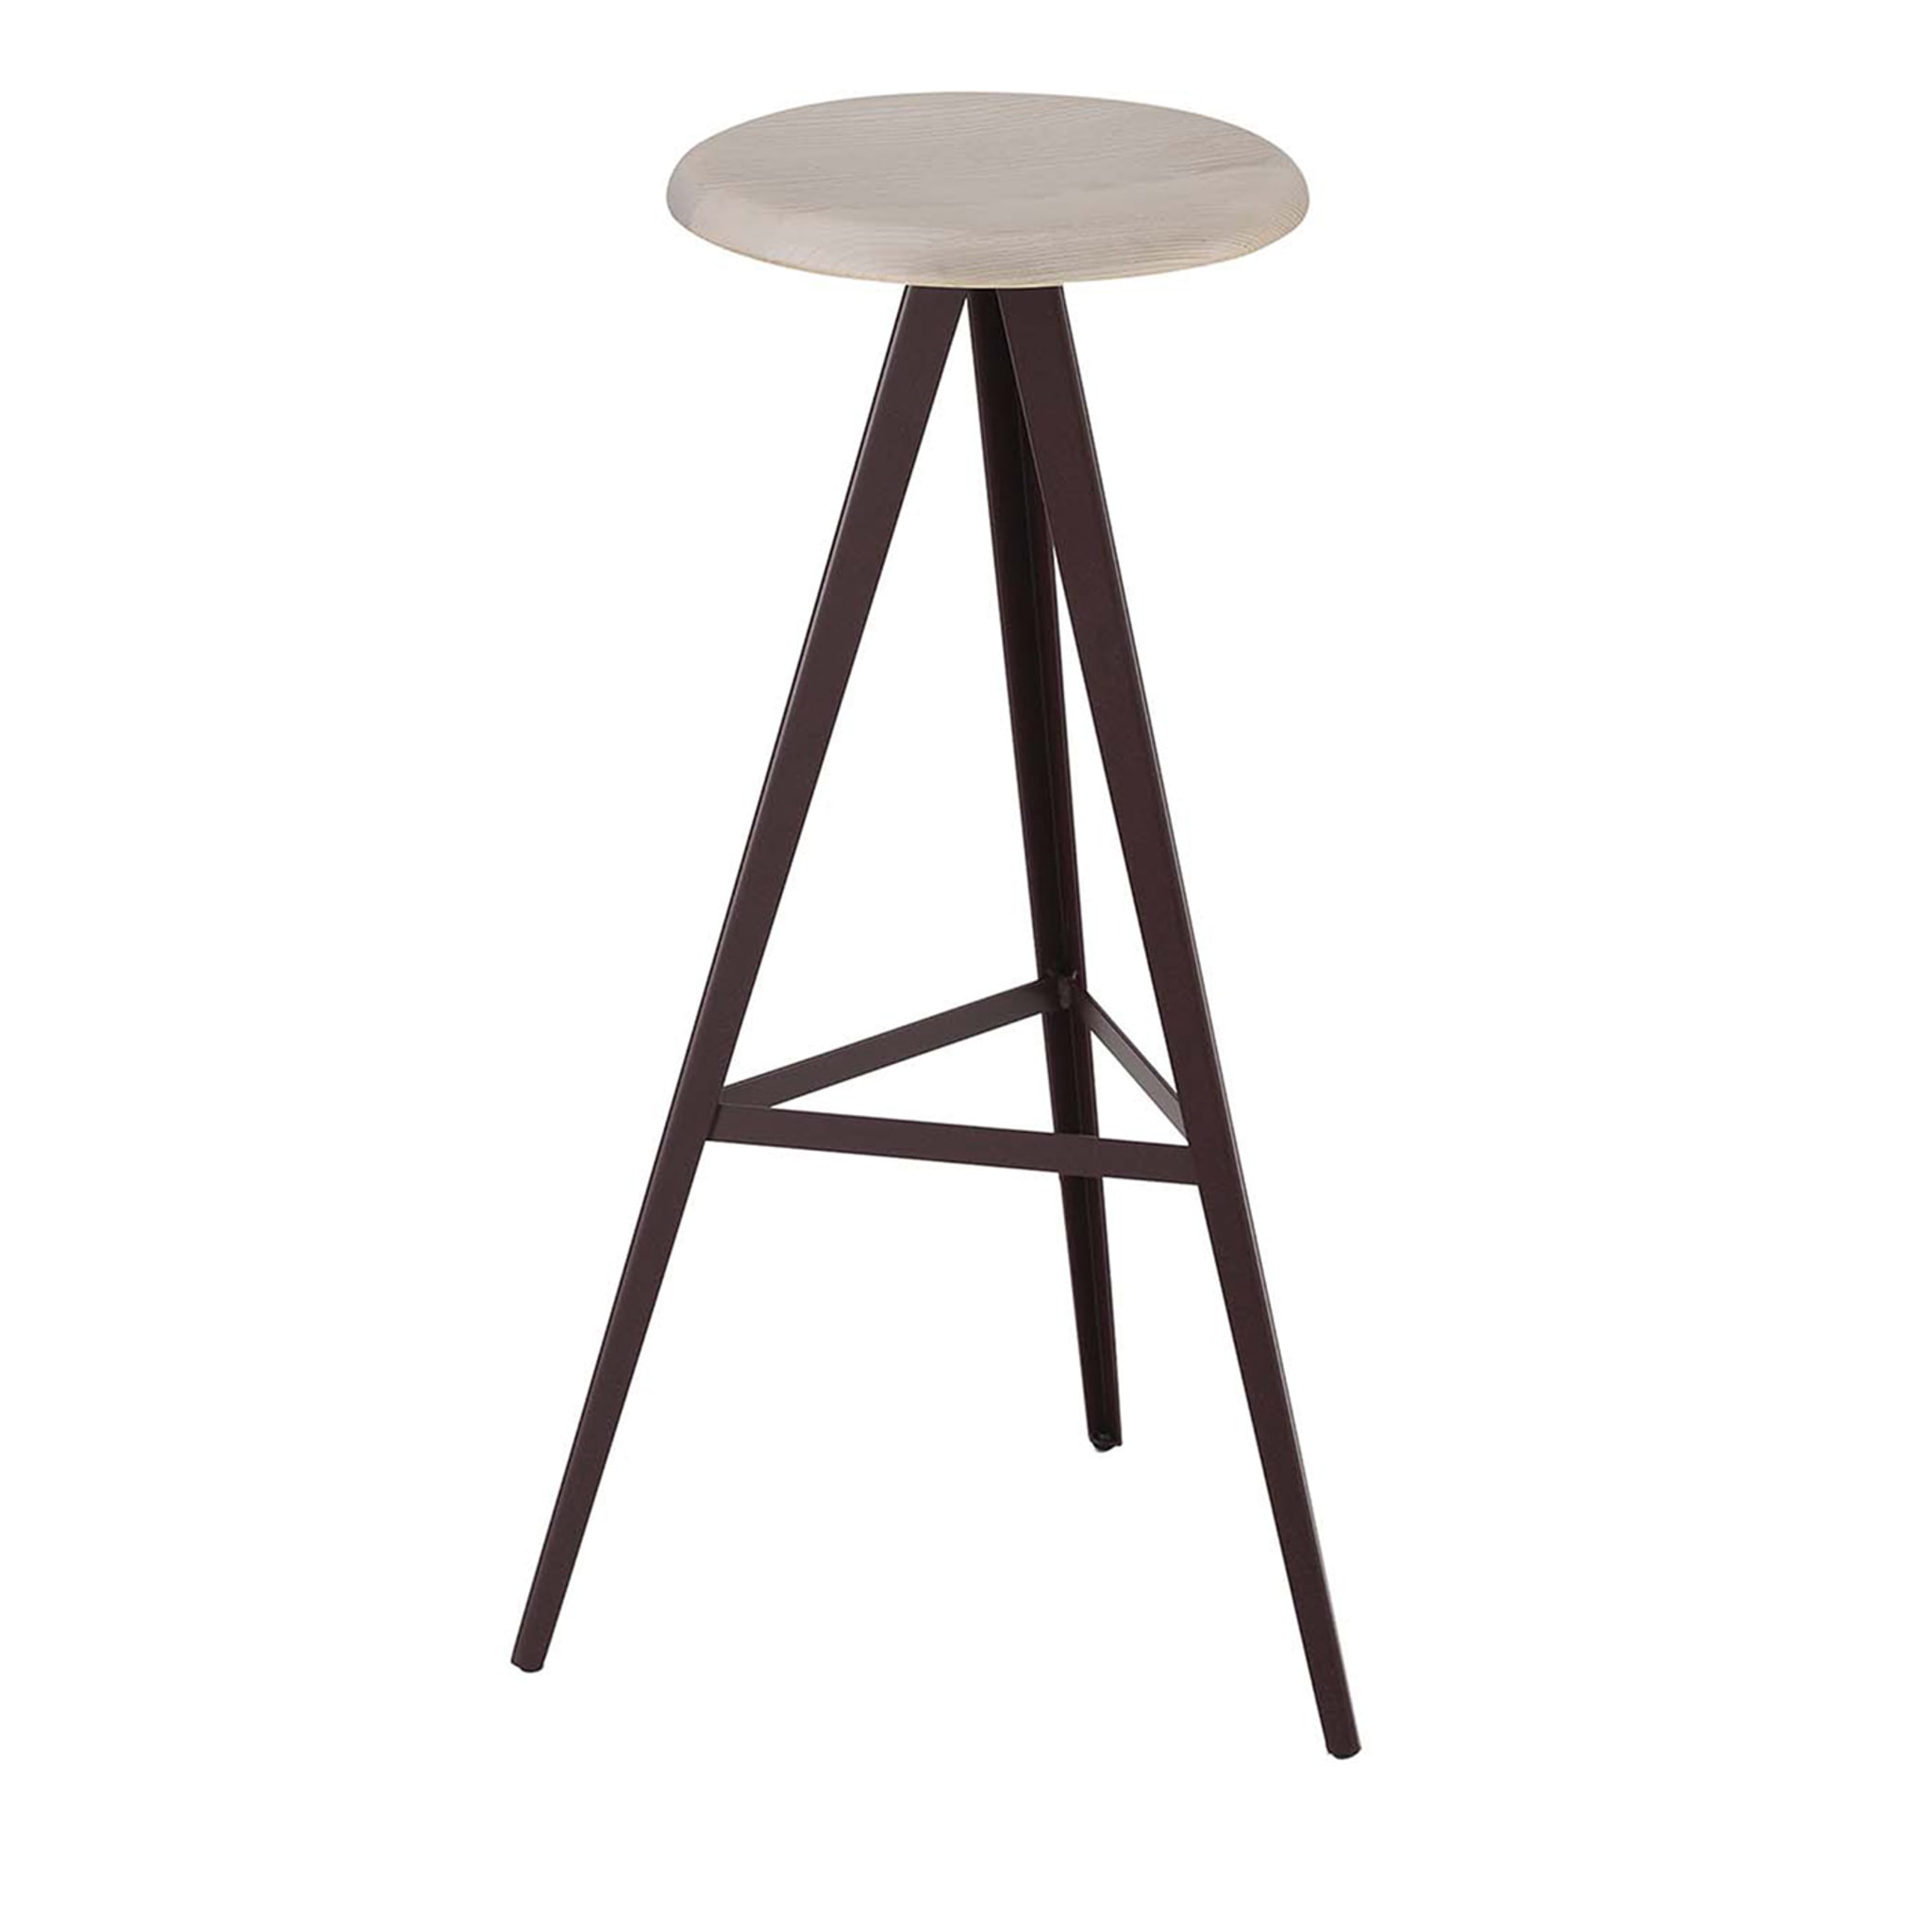 Aky Two-Color Stool by Emilio Nanni - Main view